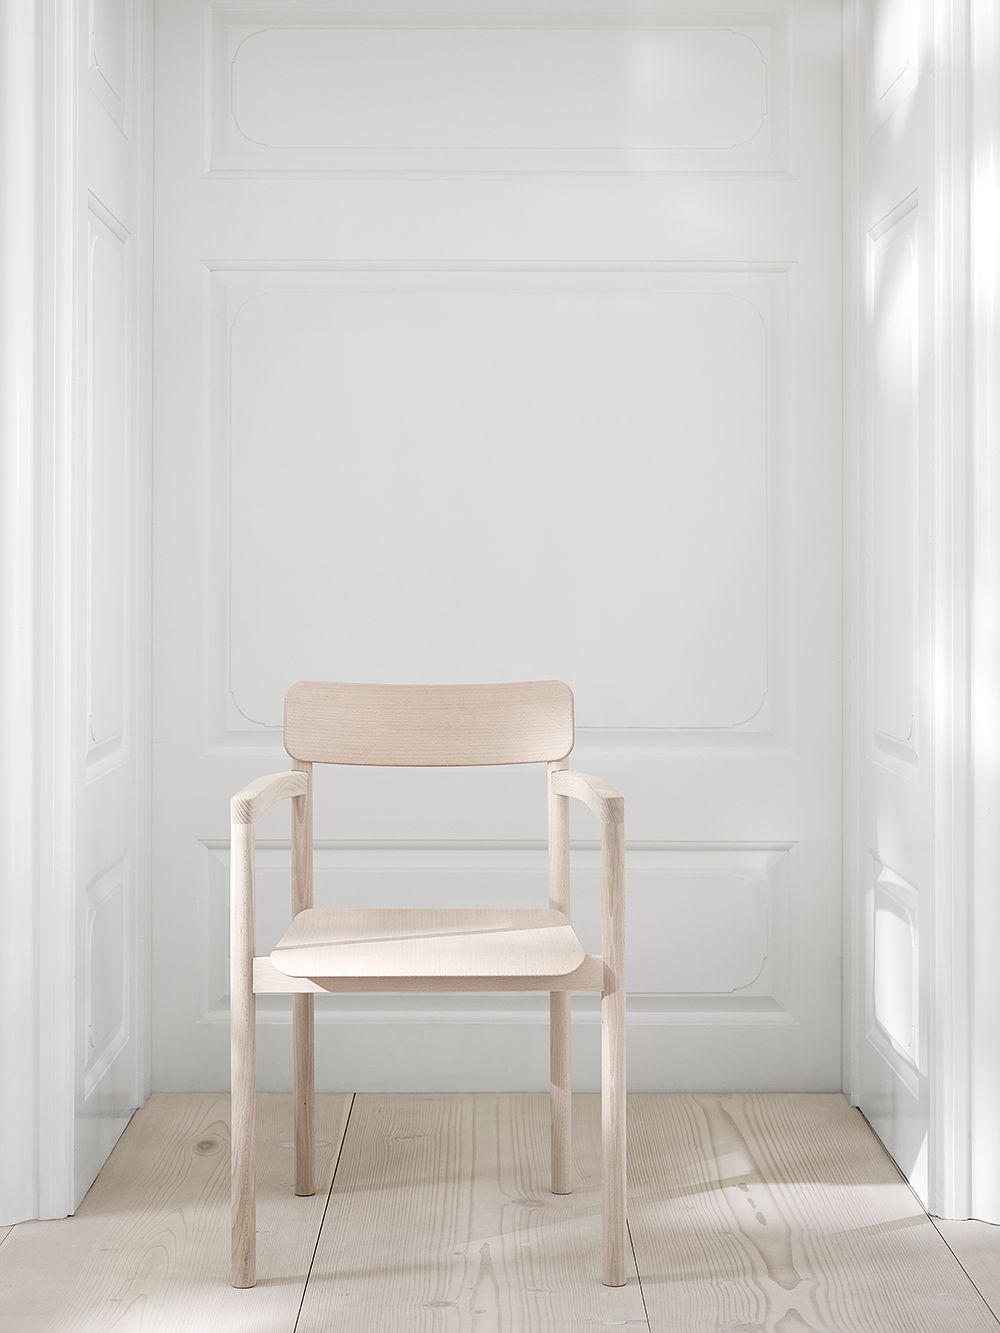 Fredericia's Post chair